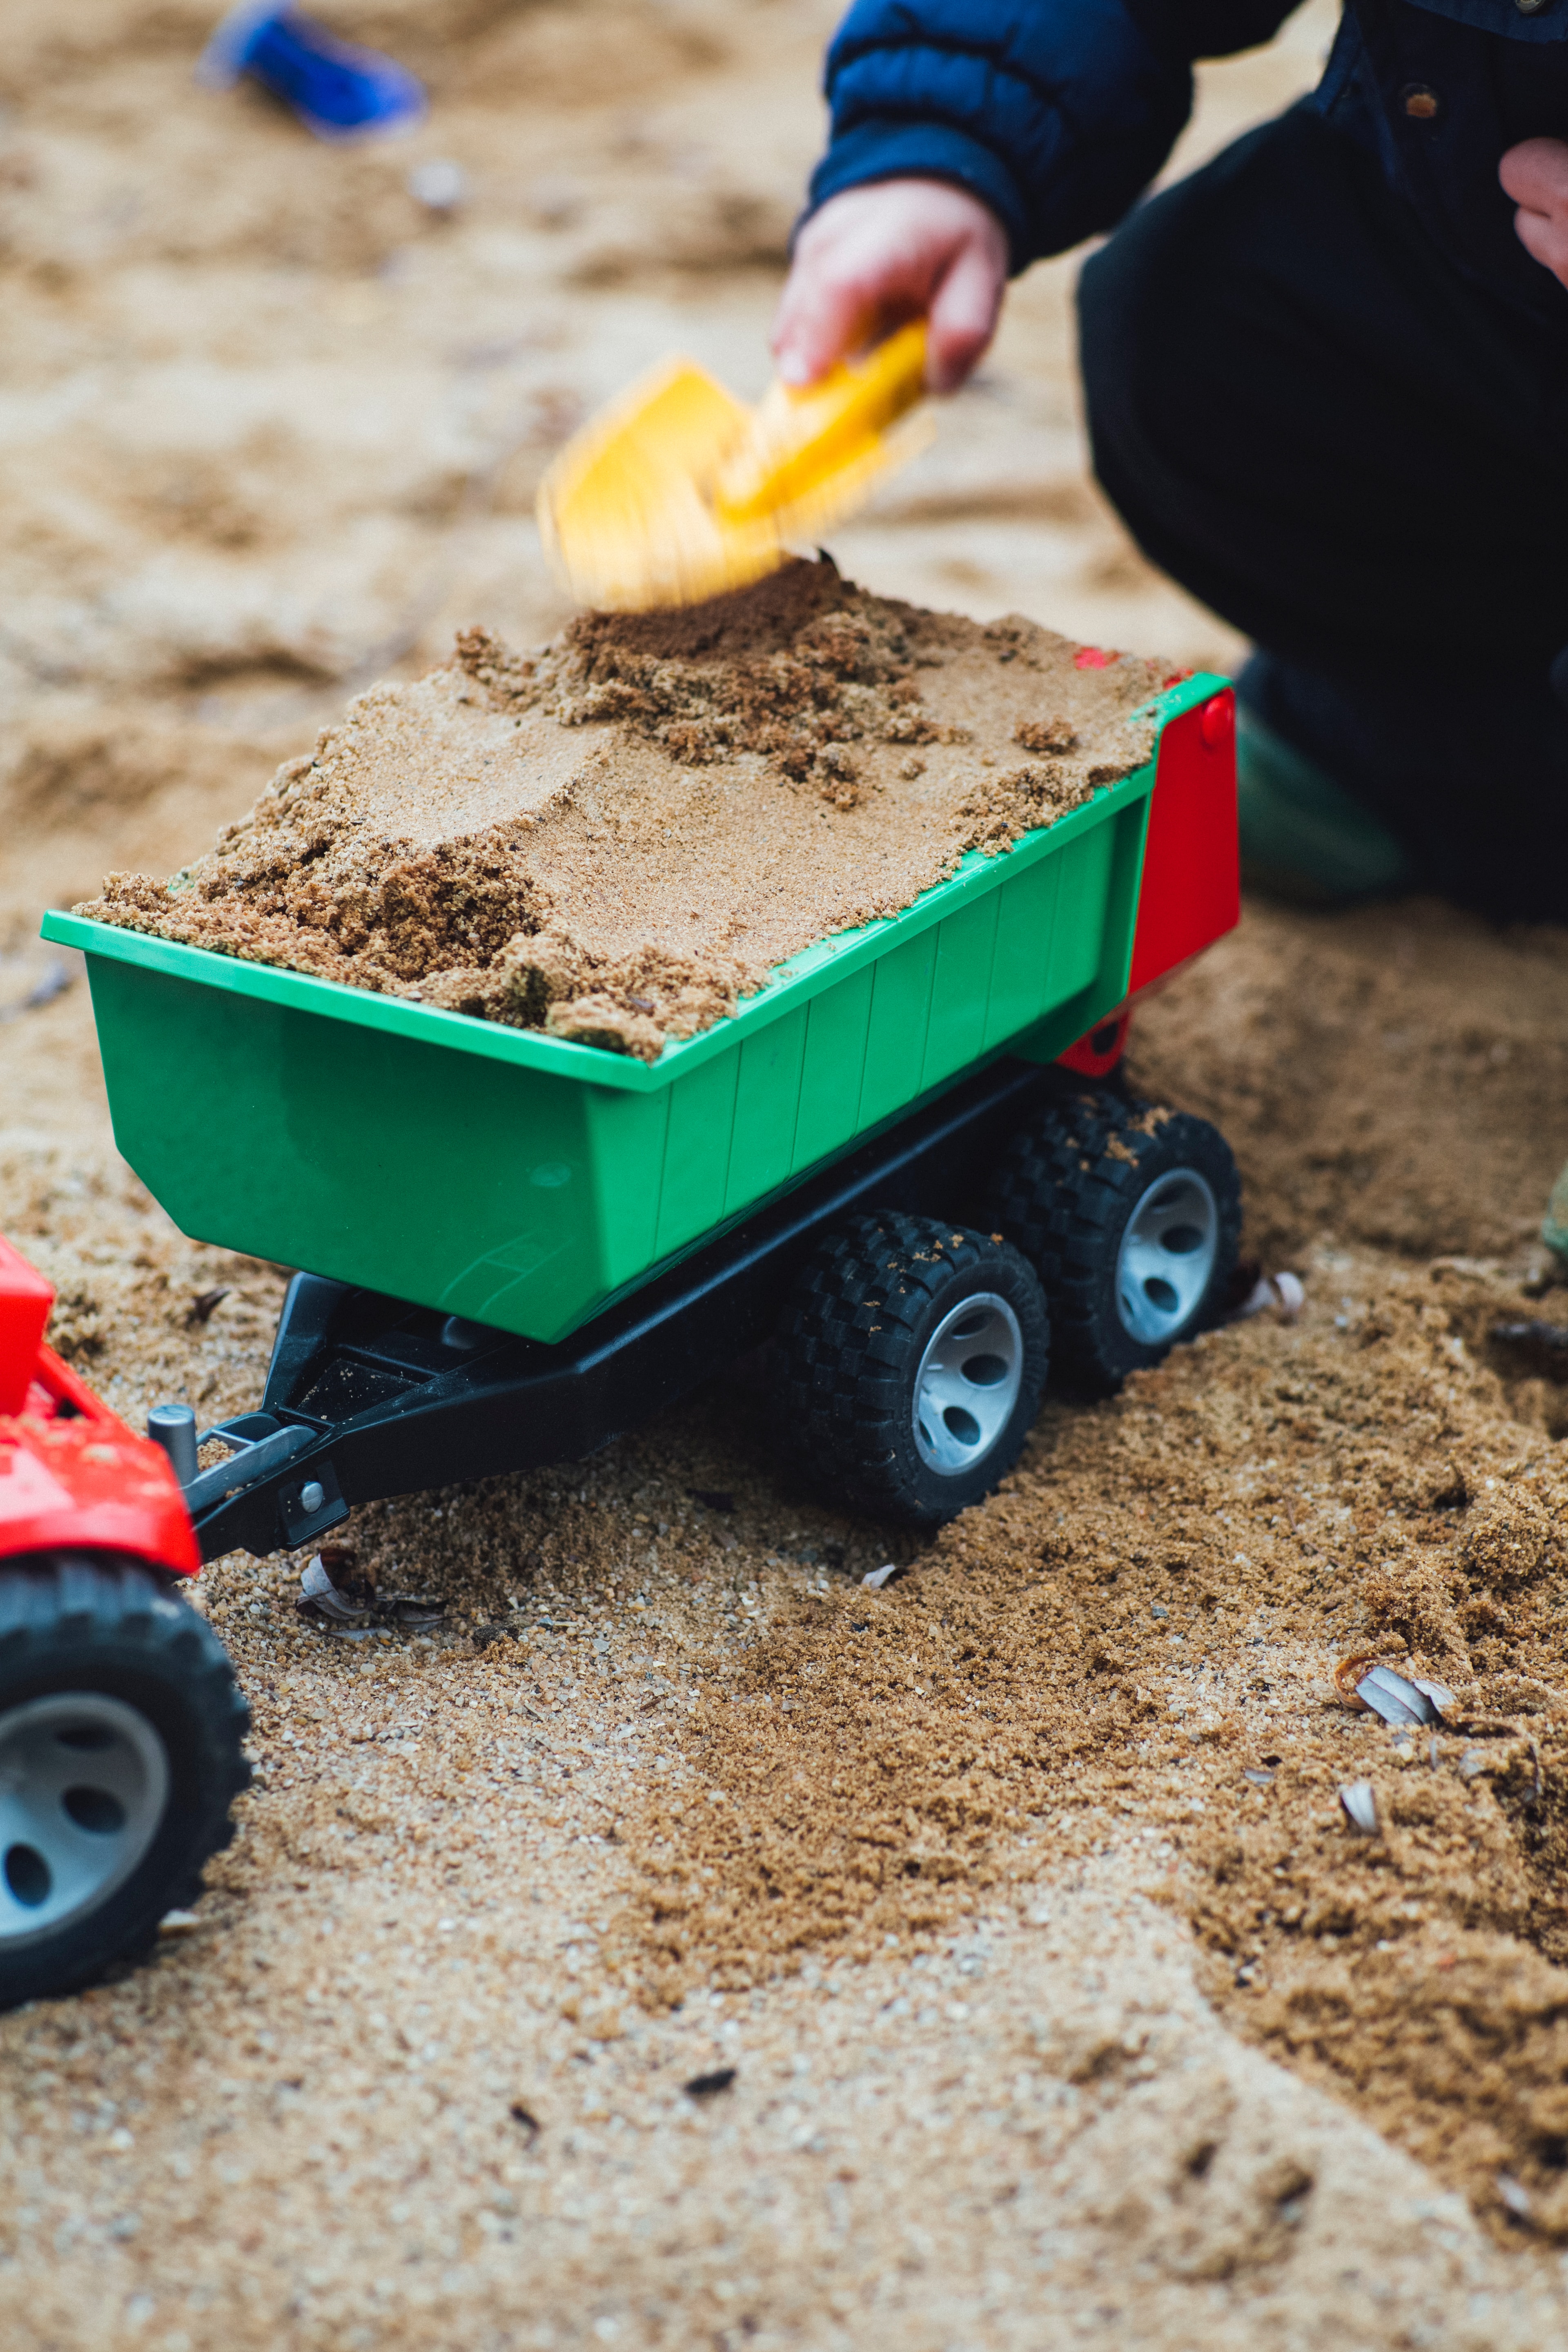 Toy Tractors And STEM Learning: How Playing With Toy Tractors Promotes Science, Technology, Engineering And Maths Skills